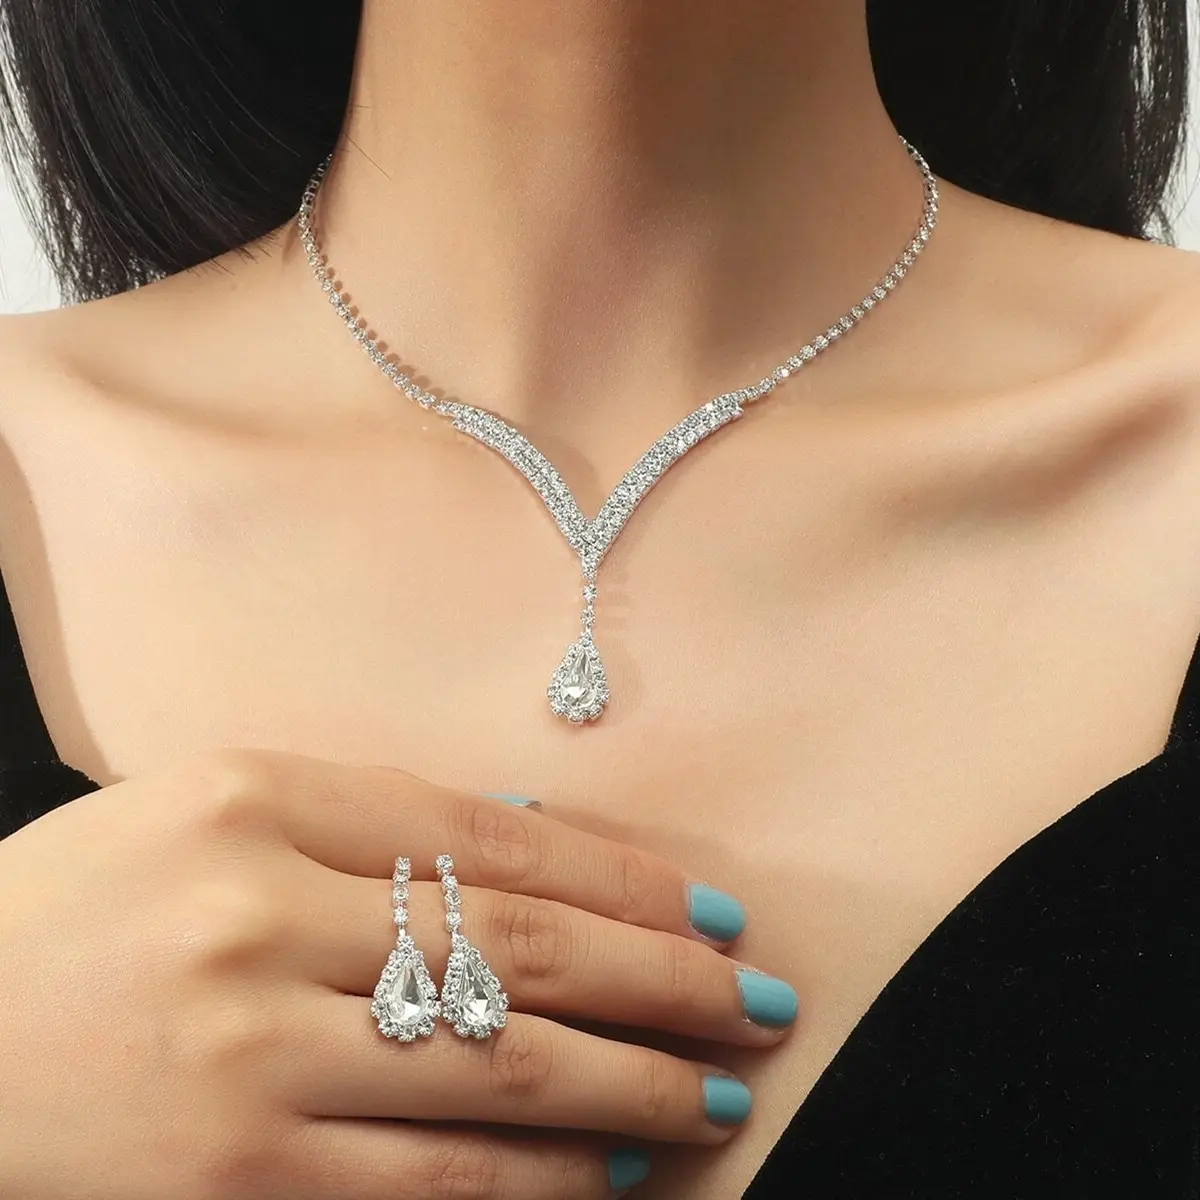 European And American Drop Pendant Necklace Earring Jewelry Sets Wedding Jewelry Set Bridal